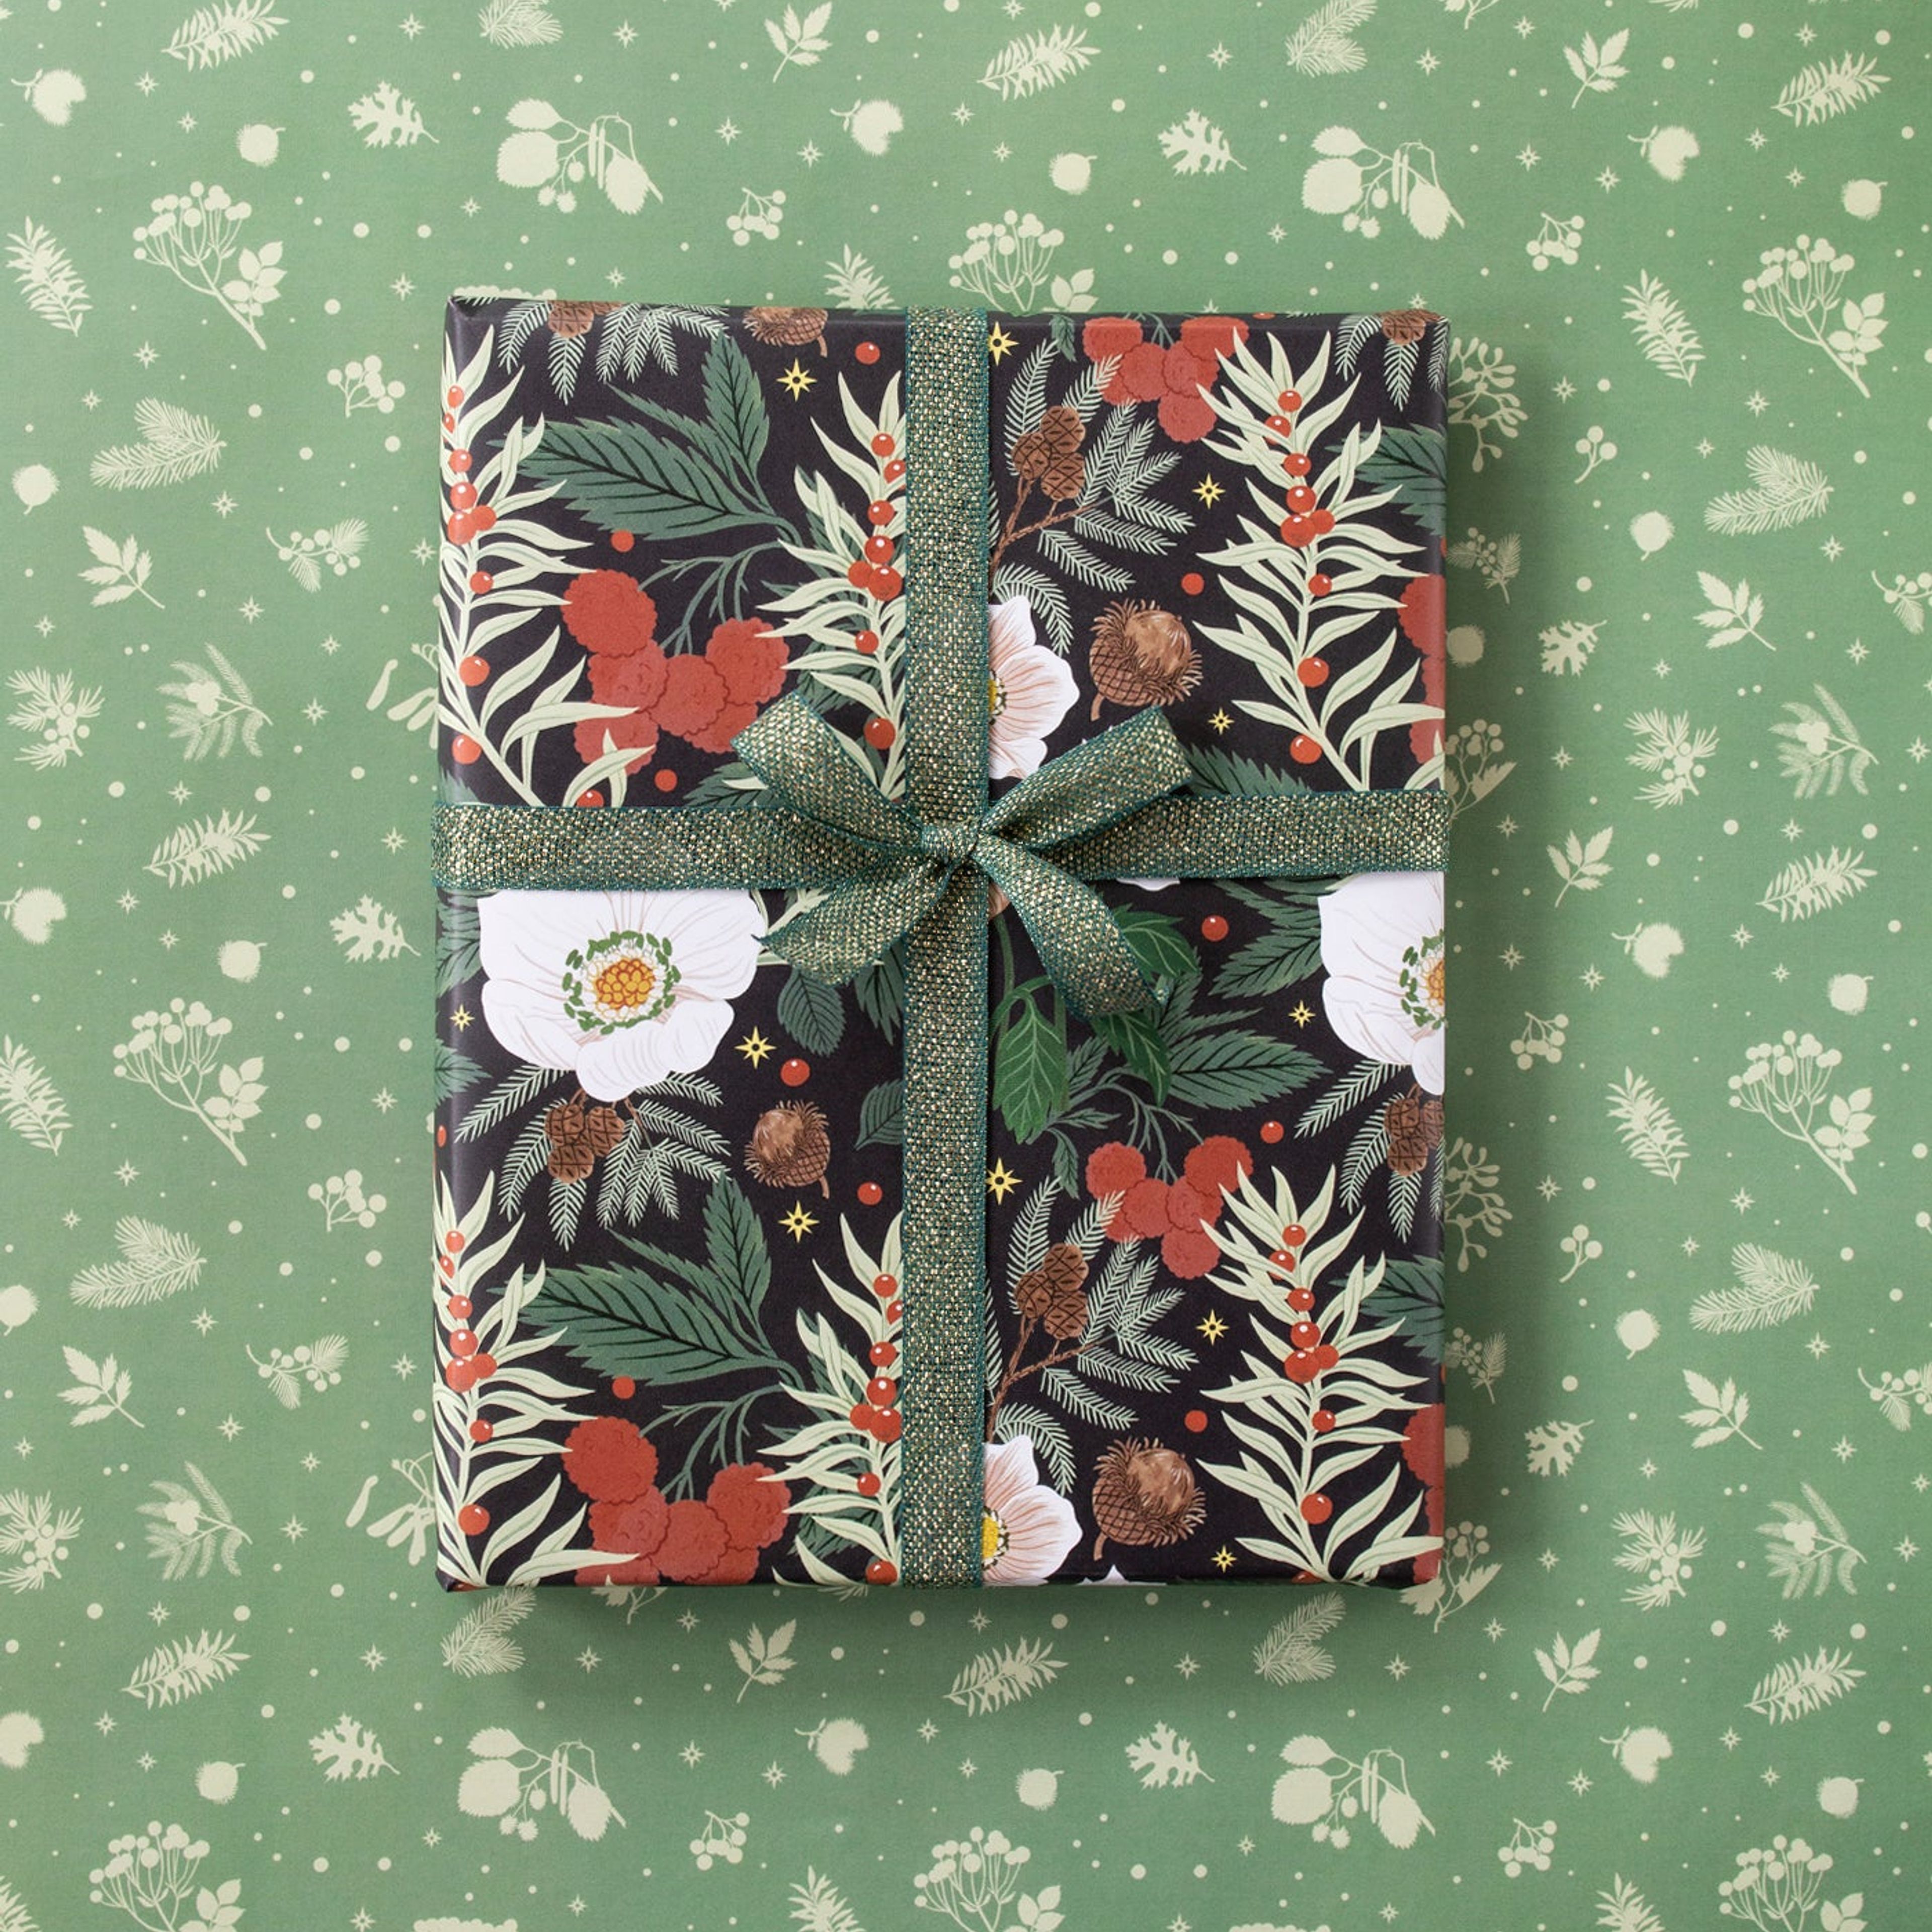 WINTER BOTANICALS | Double Sided Gift Wrap